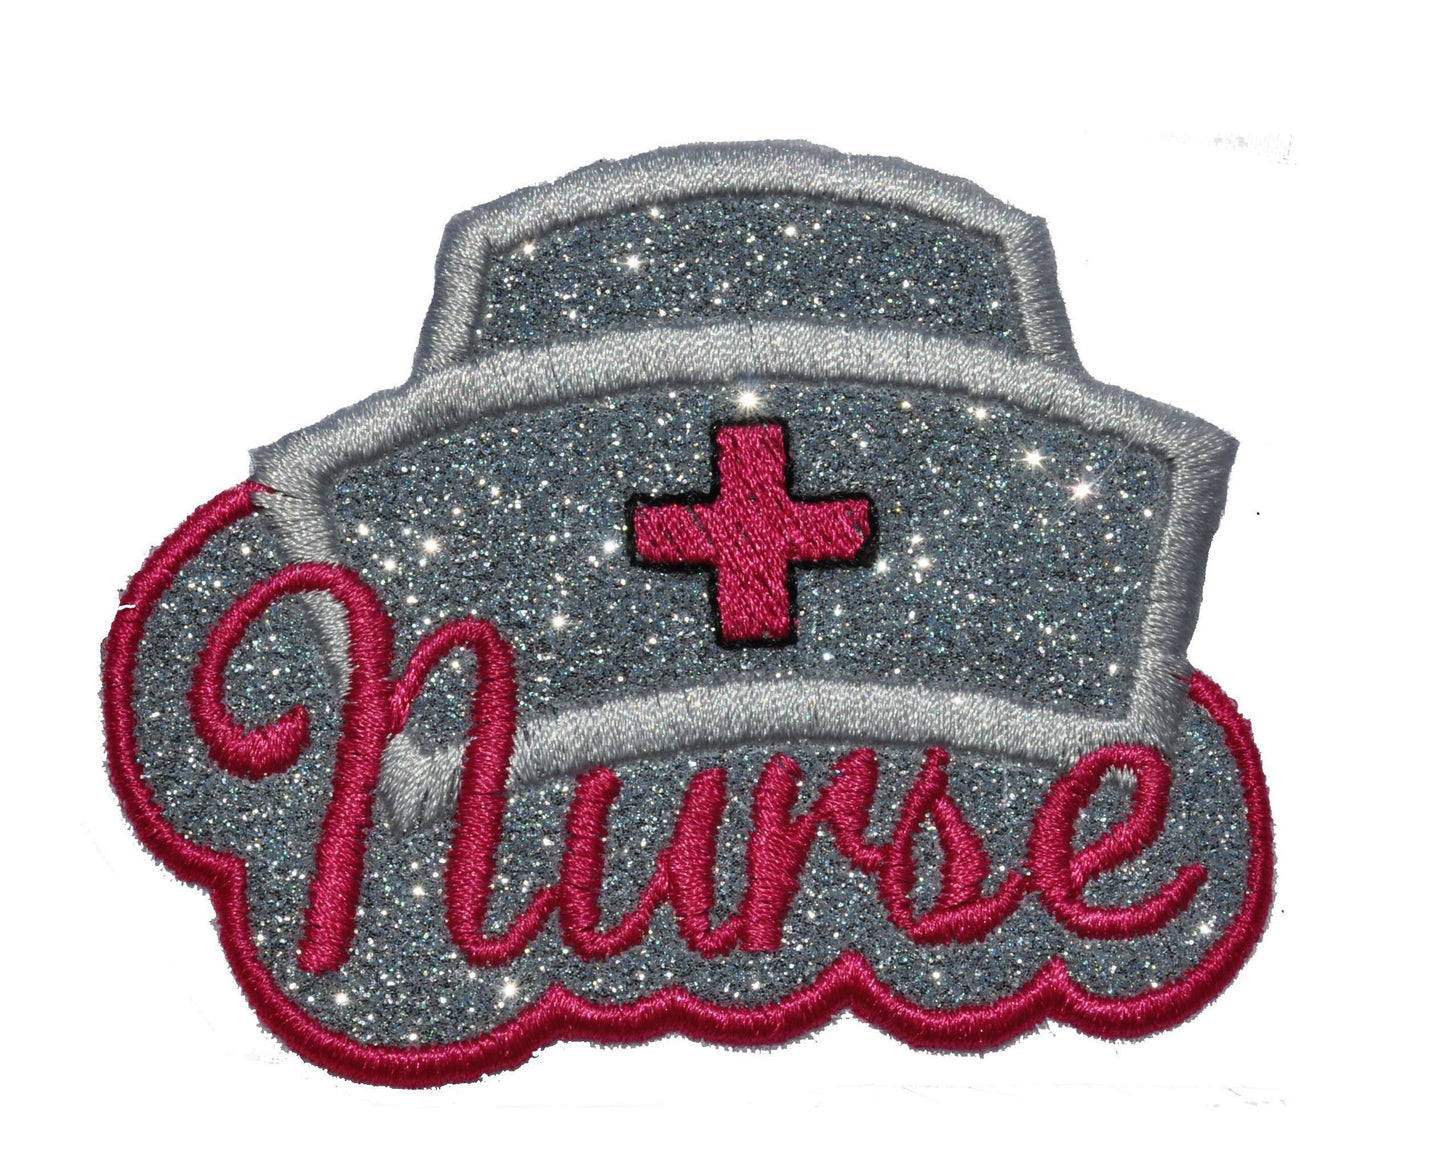 Nurses Hat Silver or White Vinyl with a Pink Cross Sparkle Glitter Patch -  Iron on or Sew on Vinyl - NO GLITTER MESS ! GL226